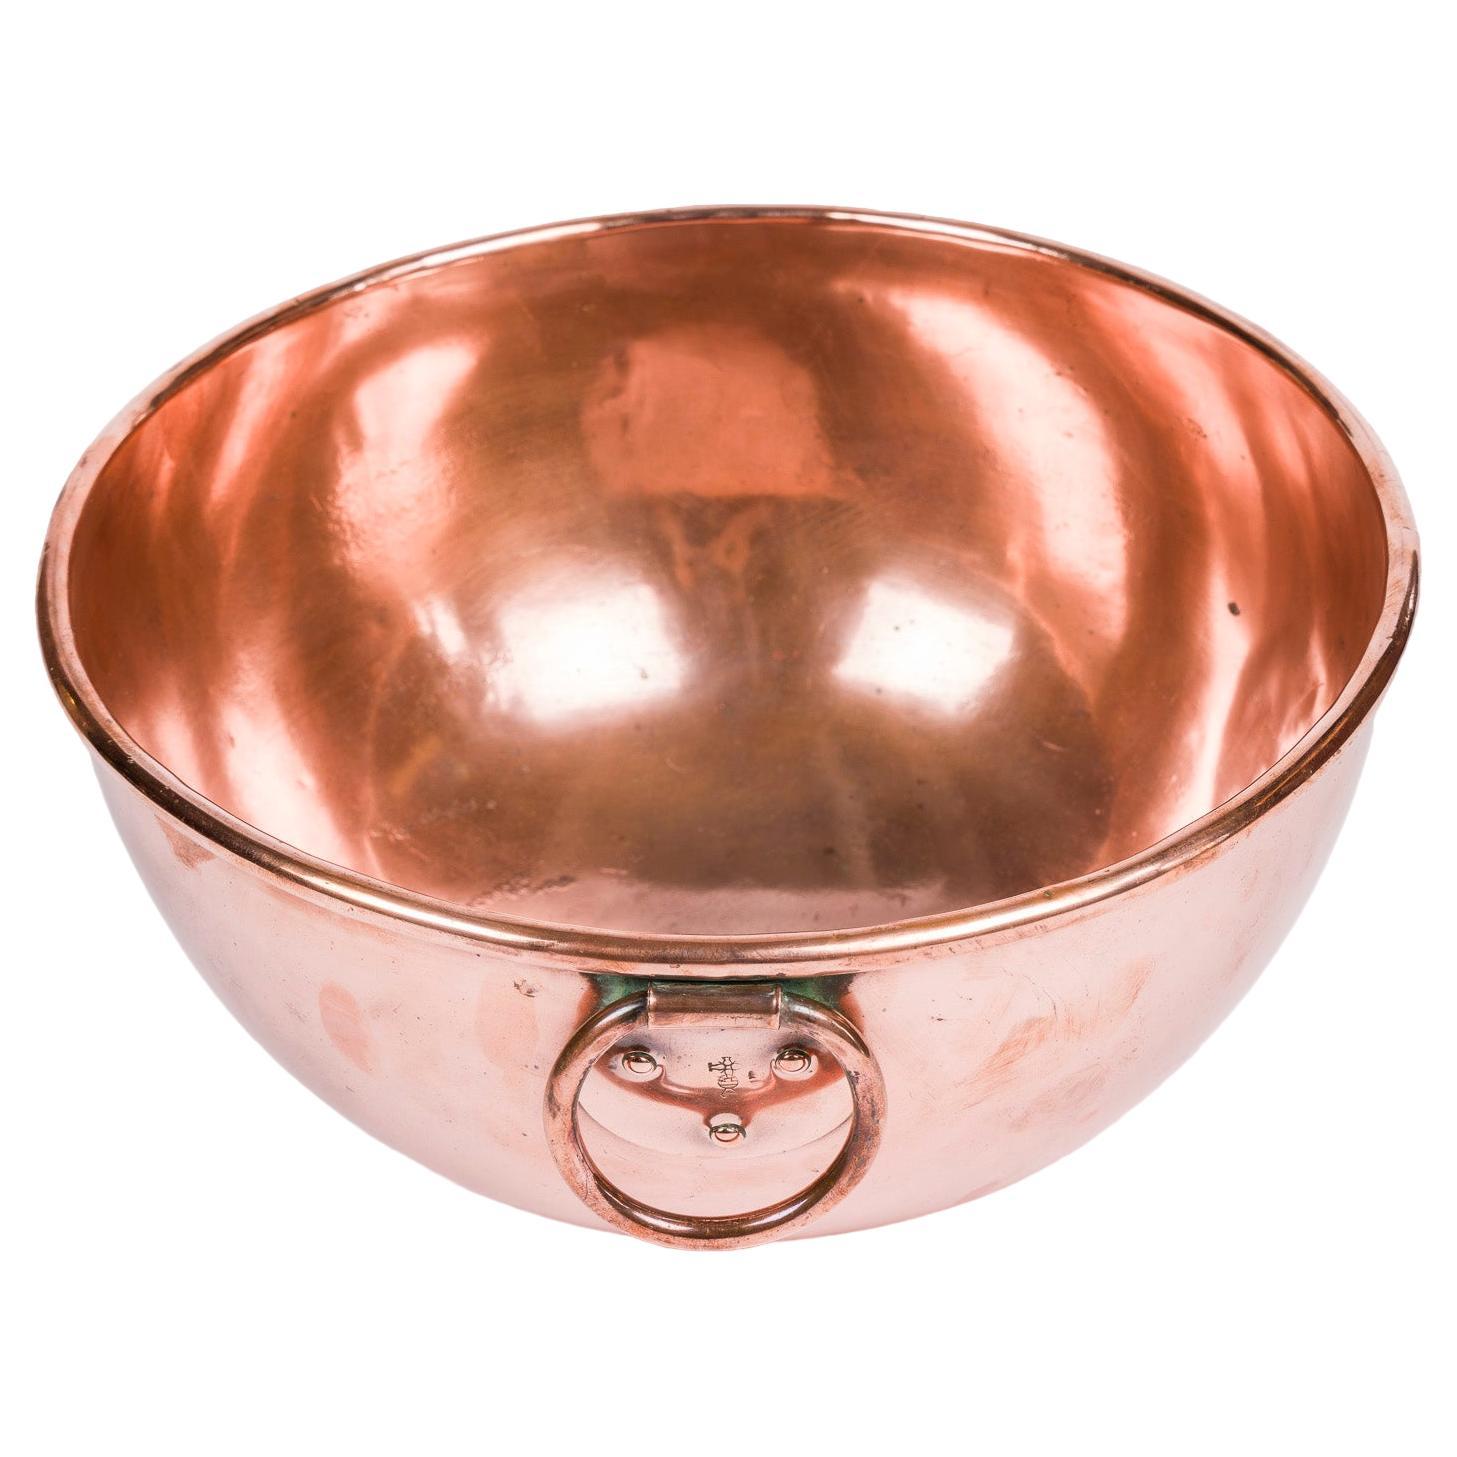 https://a.1stdibscdn.com/copper-mixing-bowl-by-benham-froud-of-london-for-sale/f_11902/f_371049421700068883457/f_37104942_1700068884068_bg_processed.jpg